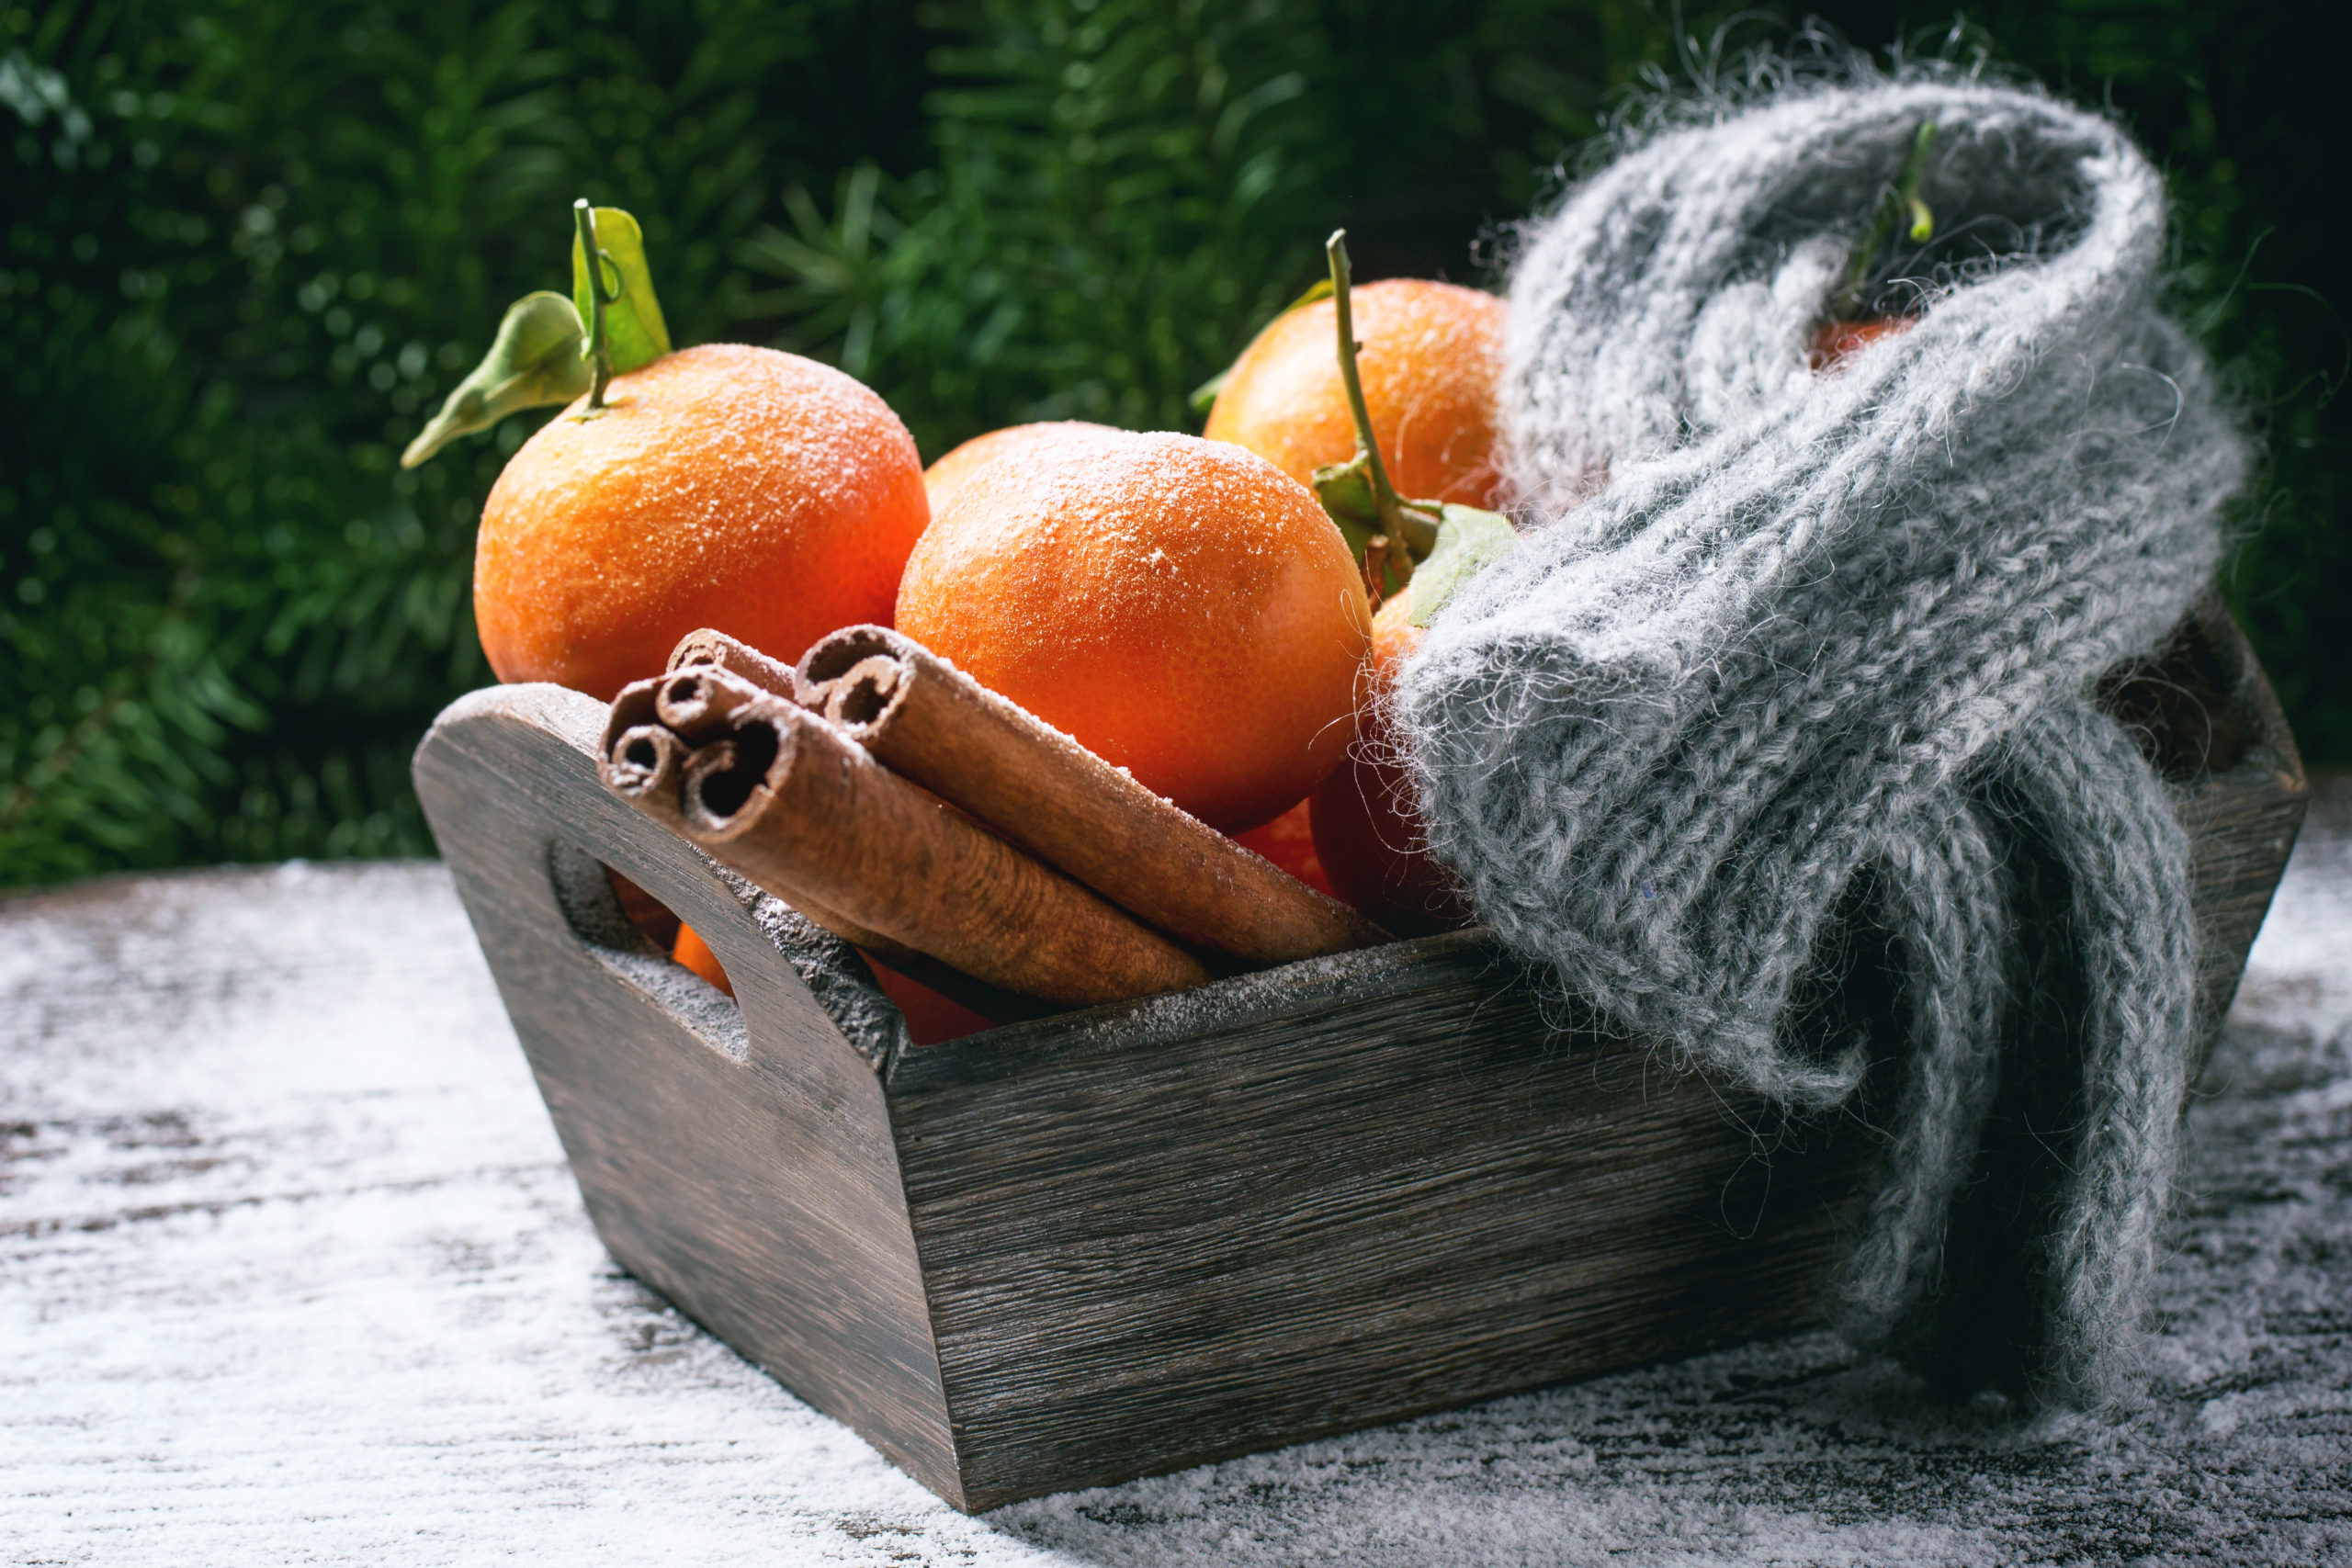 Cinnamon, Tangerine, and Pine Sprigs for the Holidays